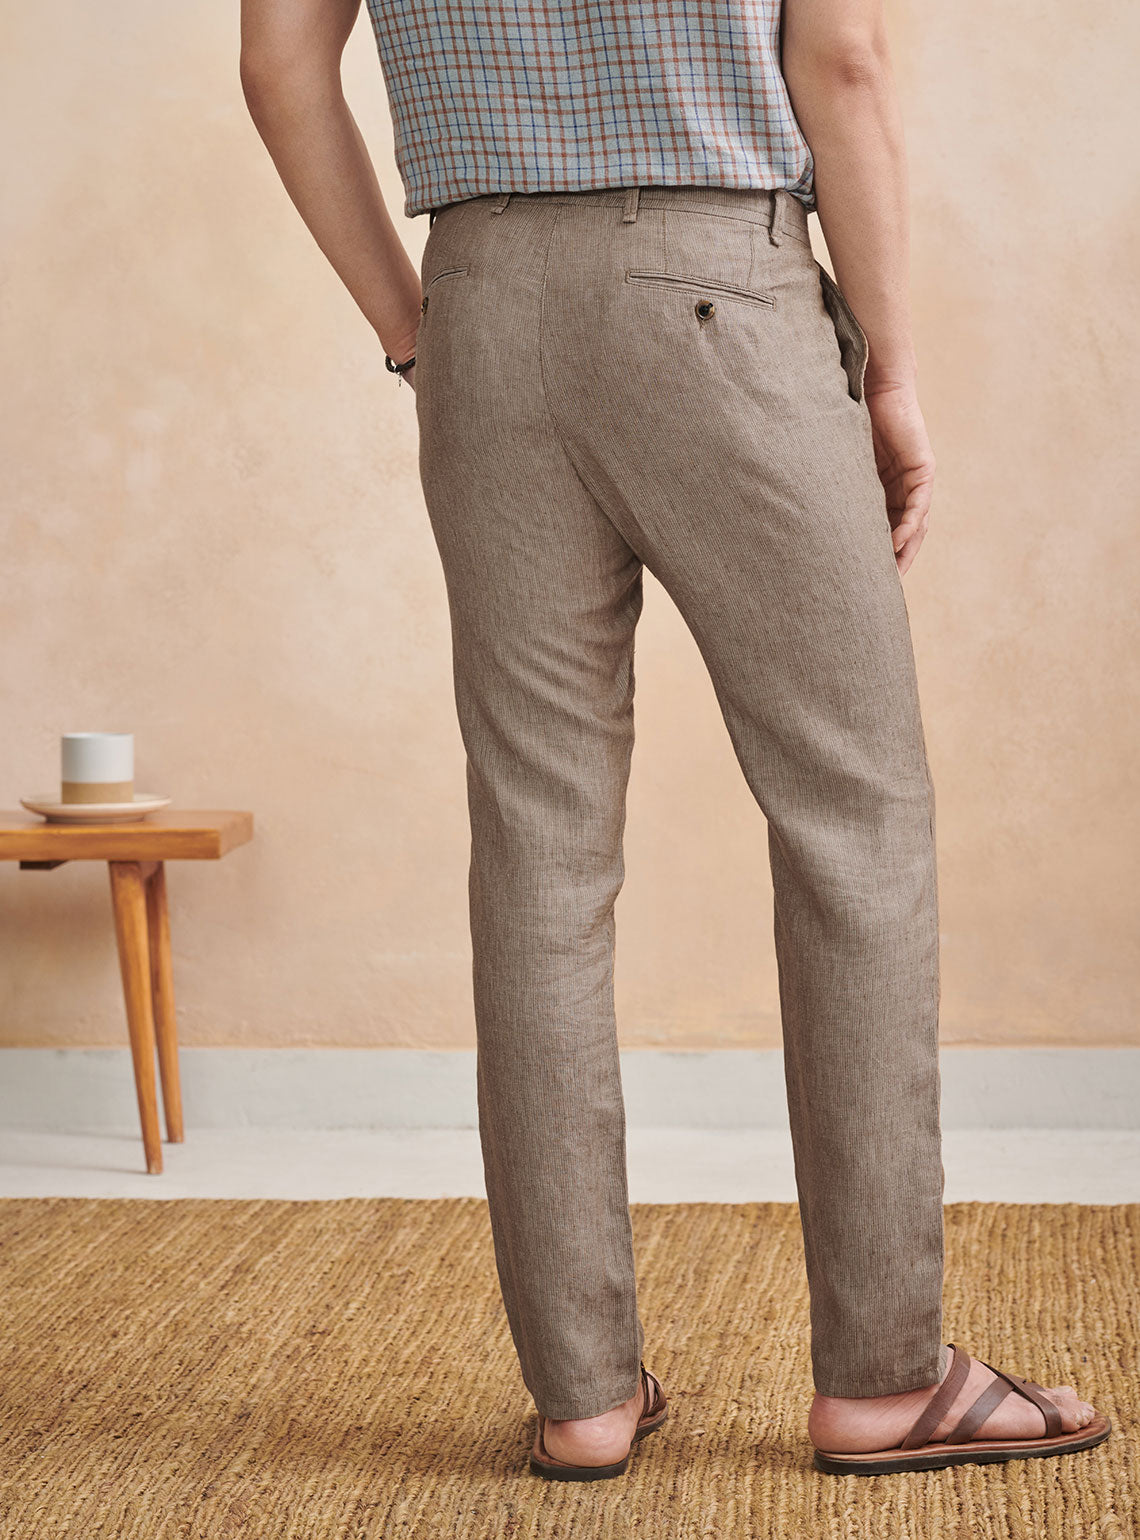 Tiger of Sweden Taven Linen Trousers Cream Sand at CareOfCarlcom